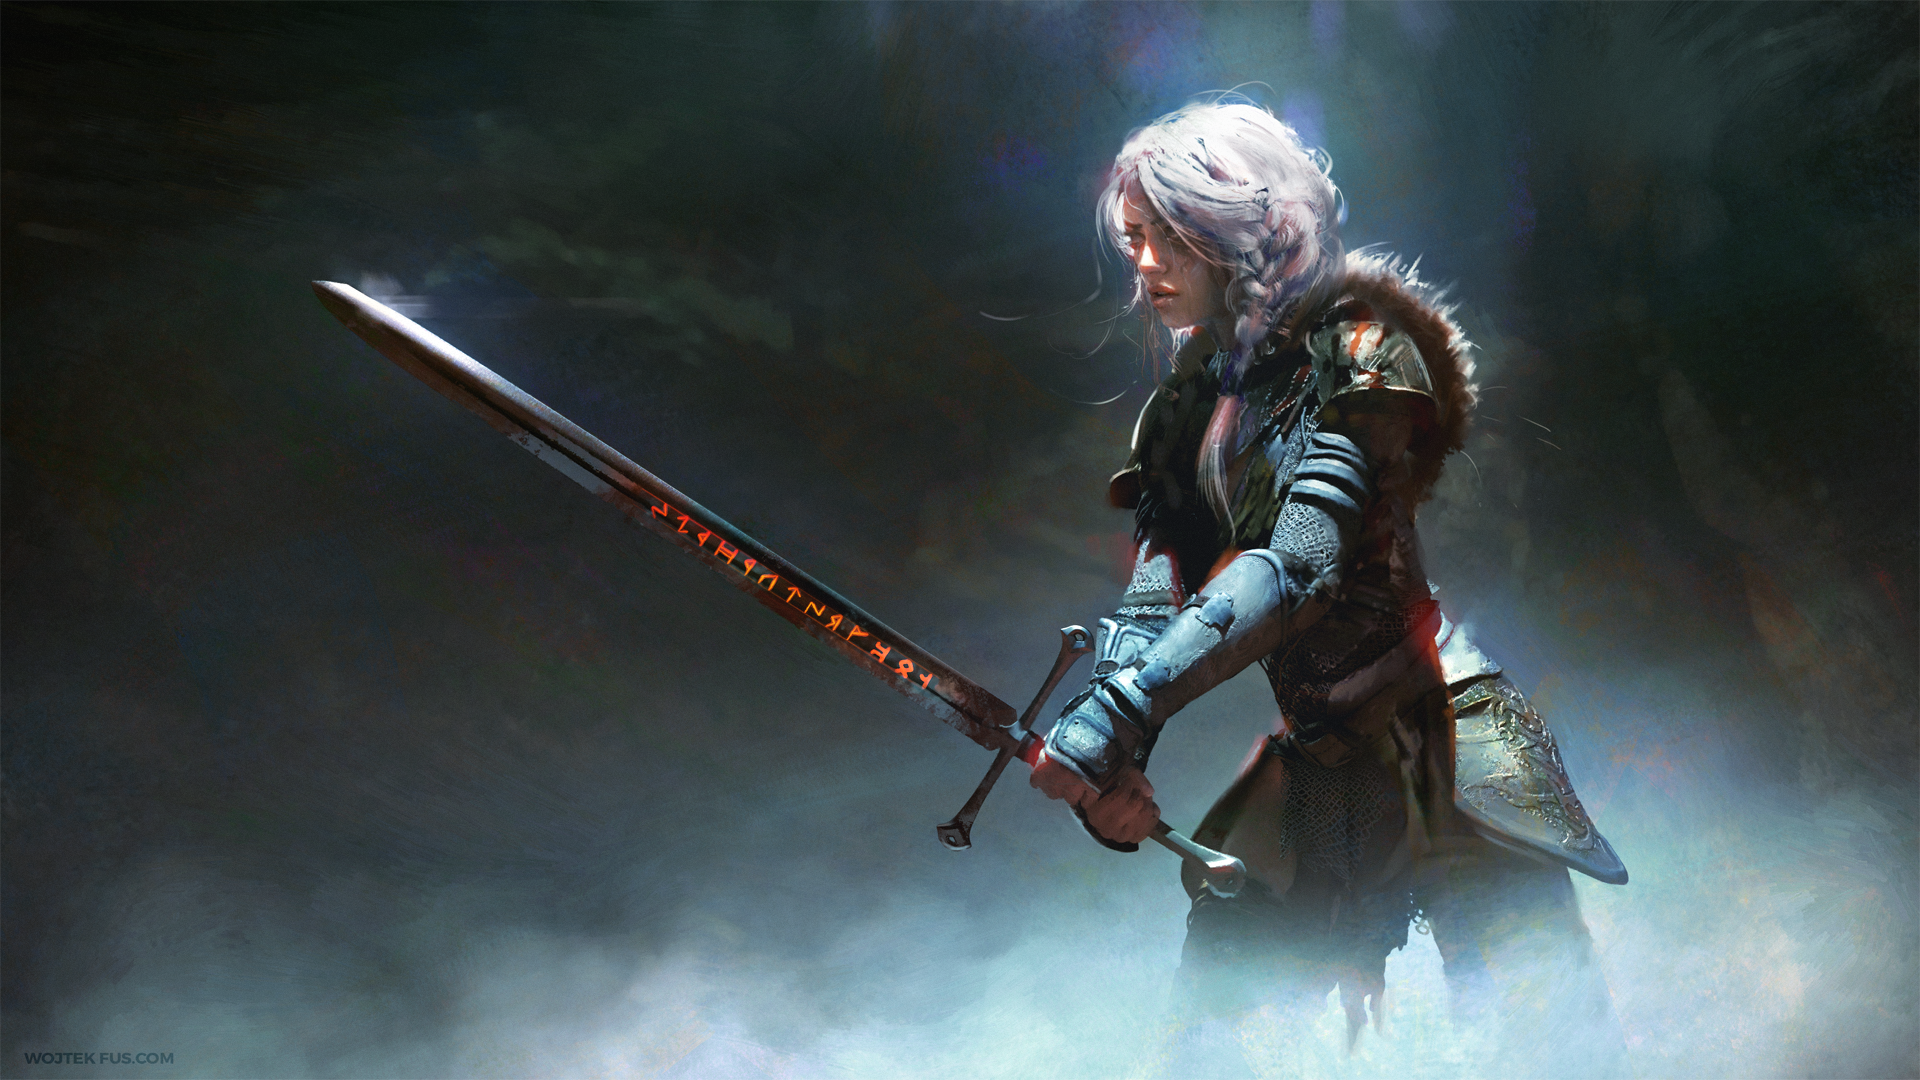 witcher 3 hd wallpaper,action adventure game,cg artwork,fictional character,action figure,pc game